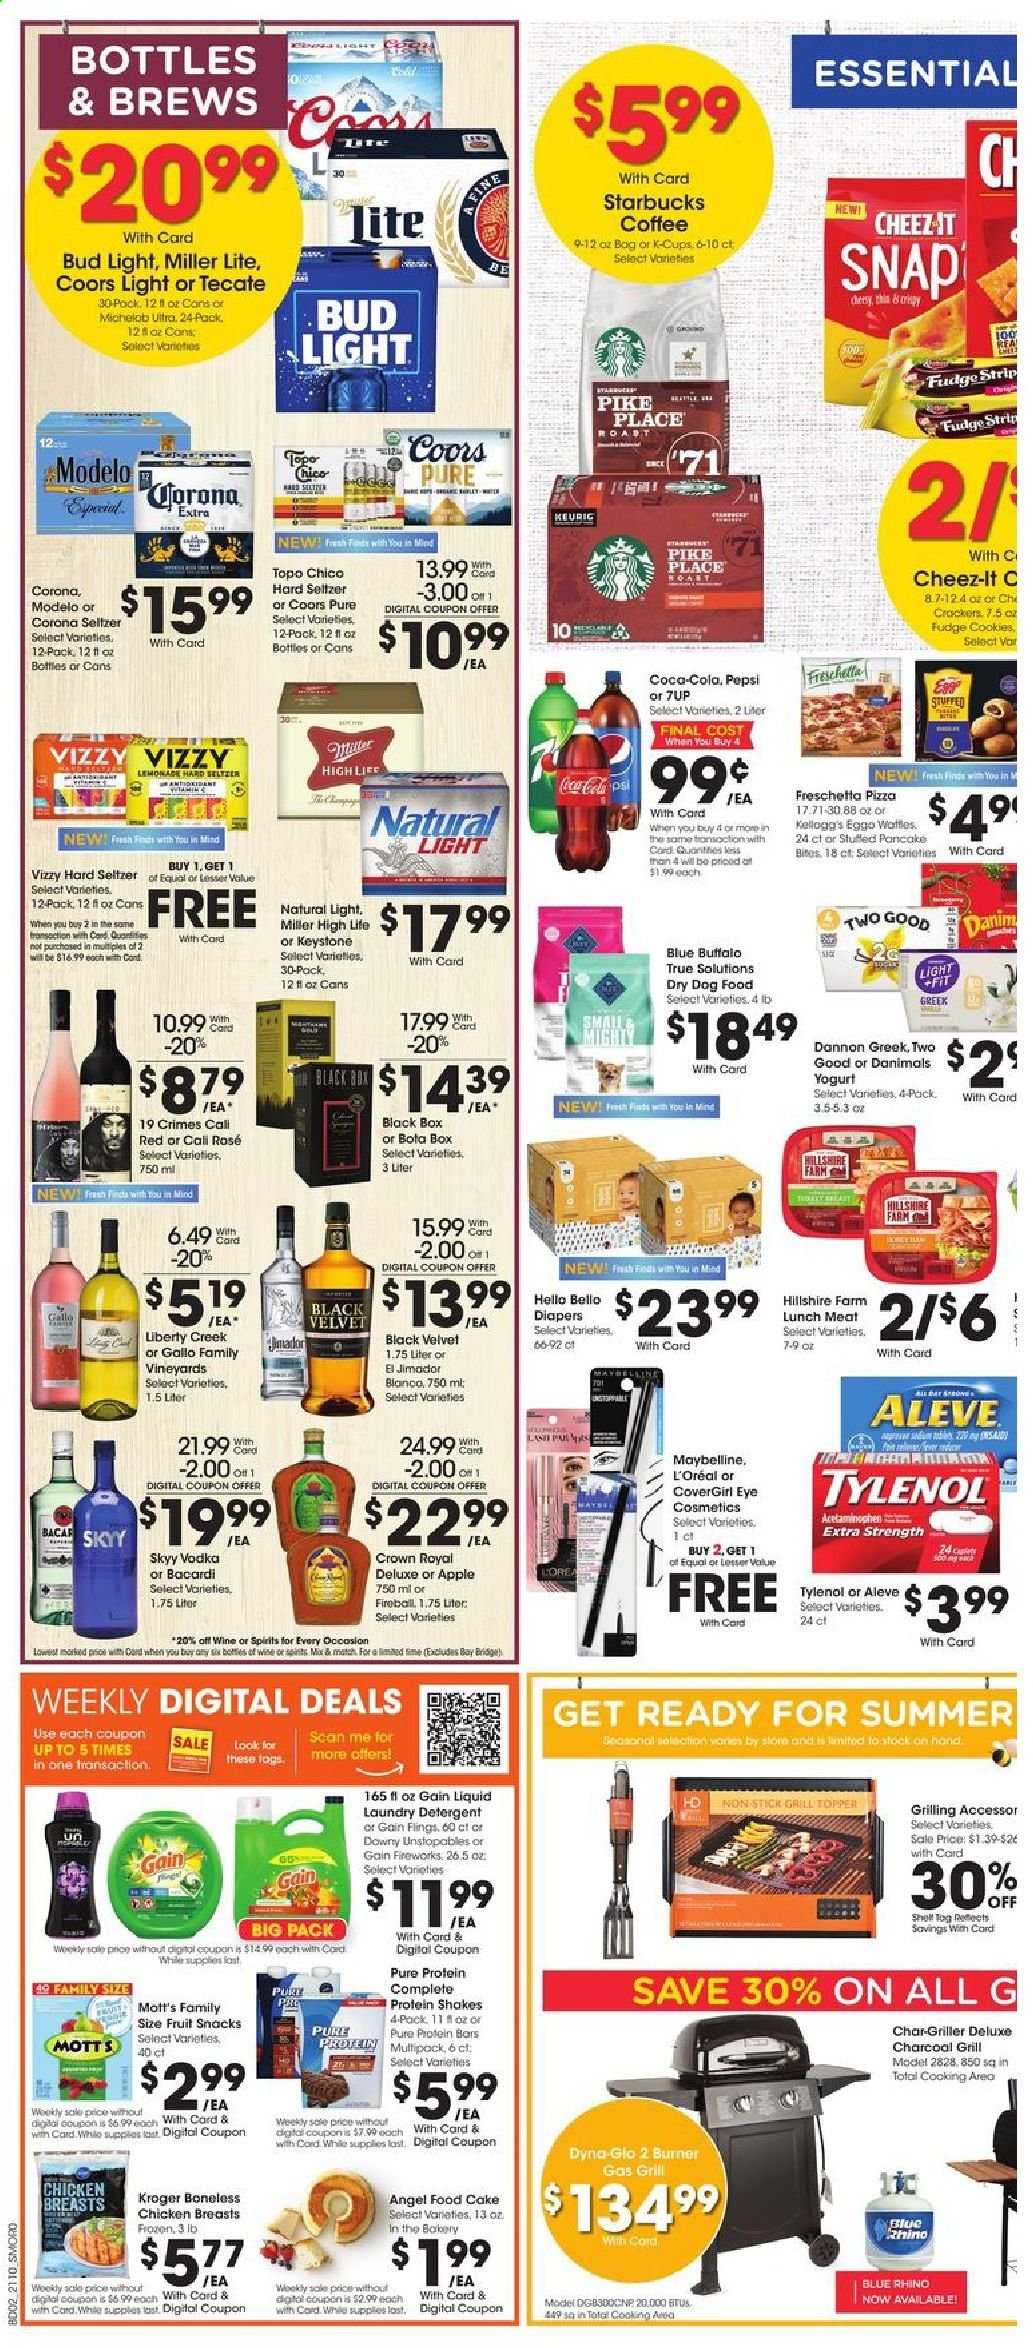 thumbnail - Smith's Flyer - 04/07/2021 - 04/13/2021 - Sales products - cake, Angel Food, pizza, pancakes, Hillshire Farm, lunch meat, yoghurt, Dannon, Danimals, protein drink, shake, cookies, fudge, fruit snack, Cheez-It, protein bar, Coca-Cola, Pepsi, 7UP, Mott's, seltzer water, coffee, Starbucks, coffee capsules, L'Or, K-Cups, wine, Gallo Family, rosé wine, Bacardi, vodka, SKYY, Hard Seltzer, beer, Miller Lite, Coors, Michelob, Bud Light, Corona Extra, Keystone, Modelo, chicken breasts, nappies, detergent, Gain, Unstopables, laundry detergent, Gain Fireworks, Pril, L’Oréal, Maybelline, topper, animal food, dog food, dry dog food, gas grill, grill, Aleve, Tylenol. Page 4.